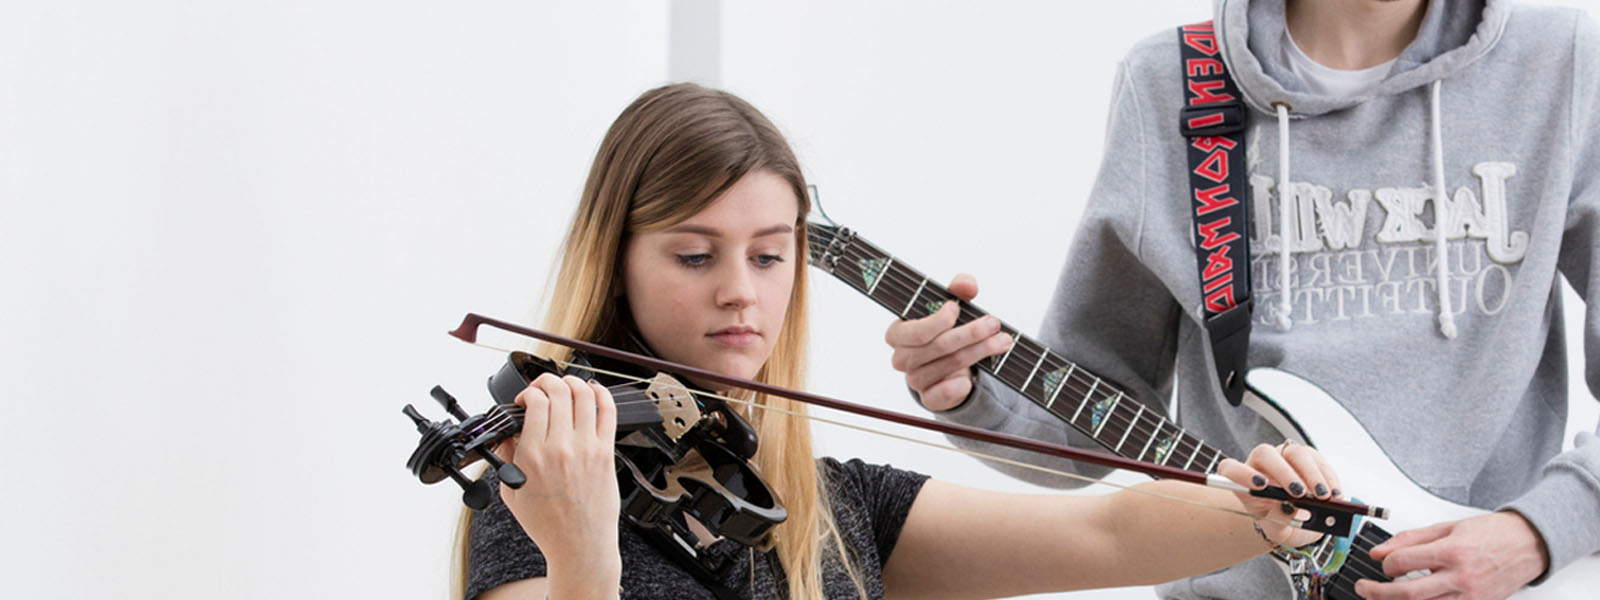 Male student playing electric guitar alongside female student playing a violin